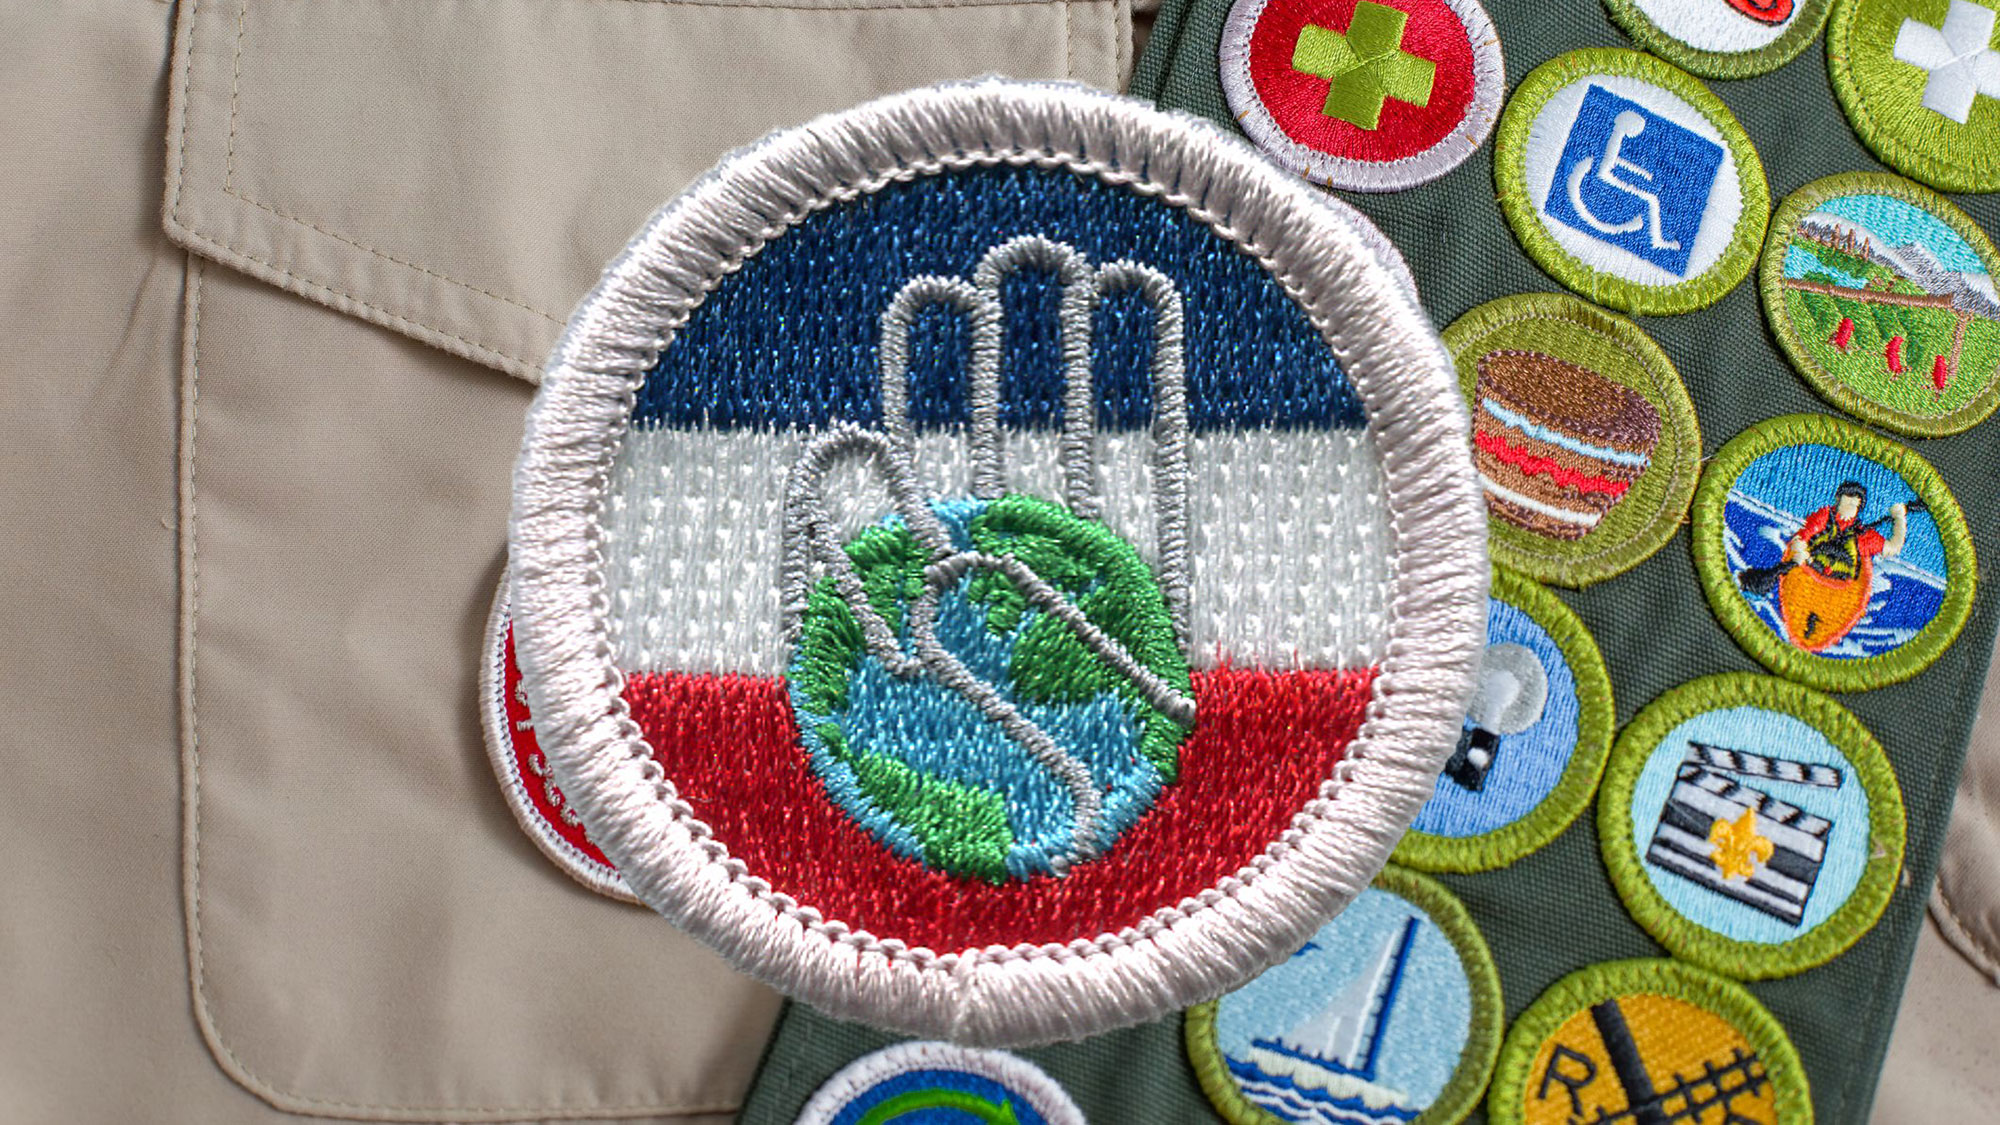 citizenship in the world merit badge requirements